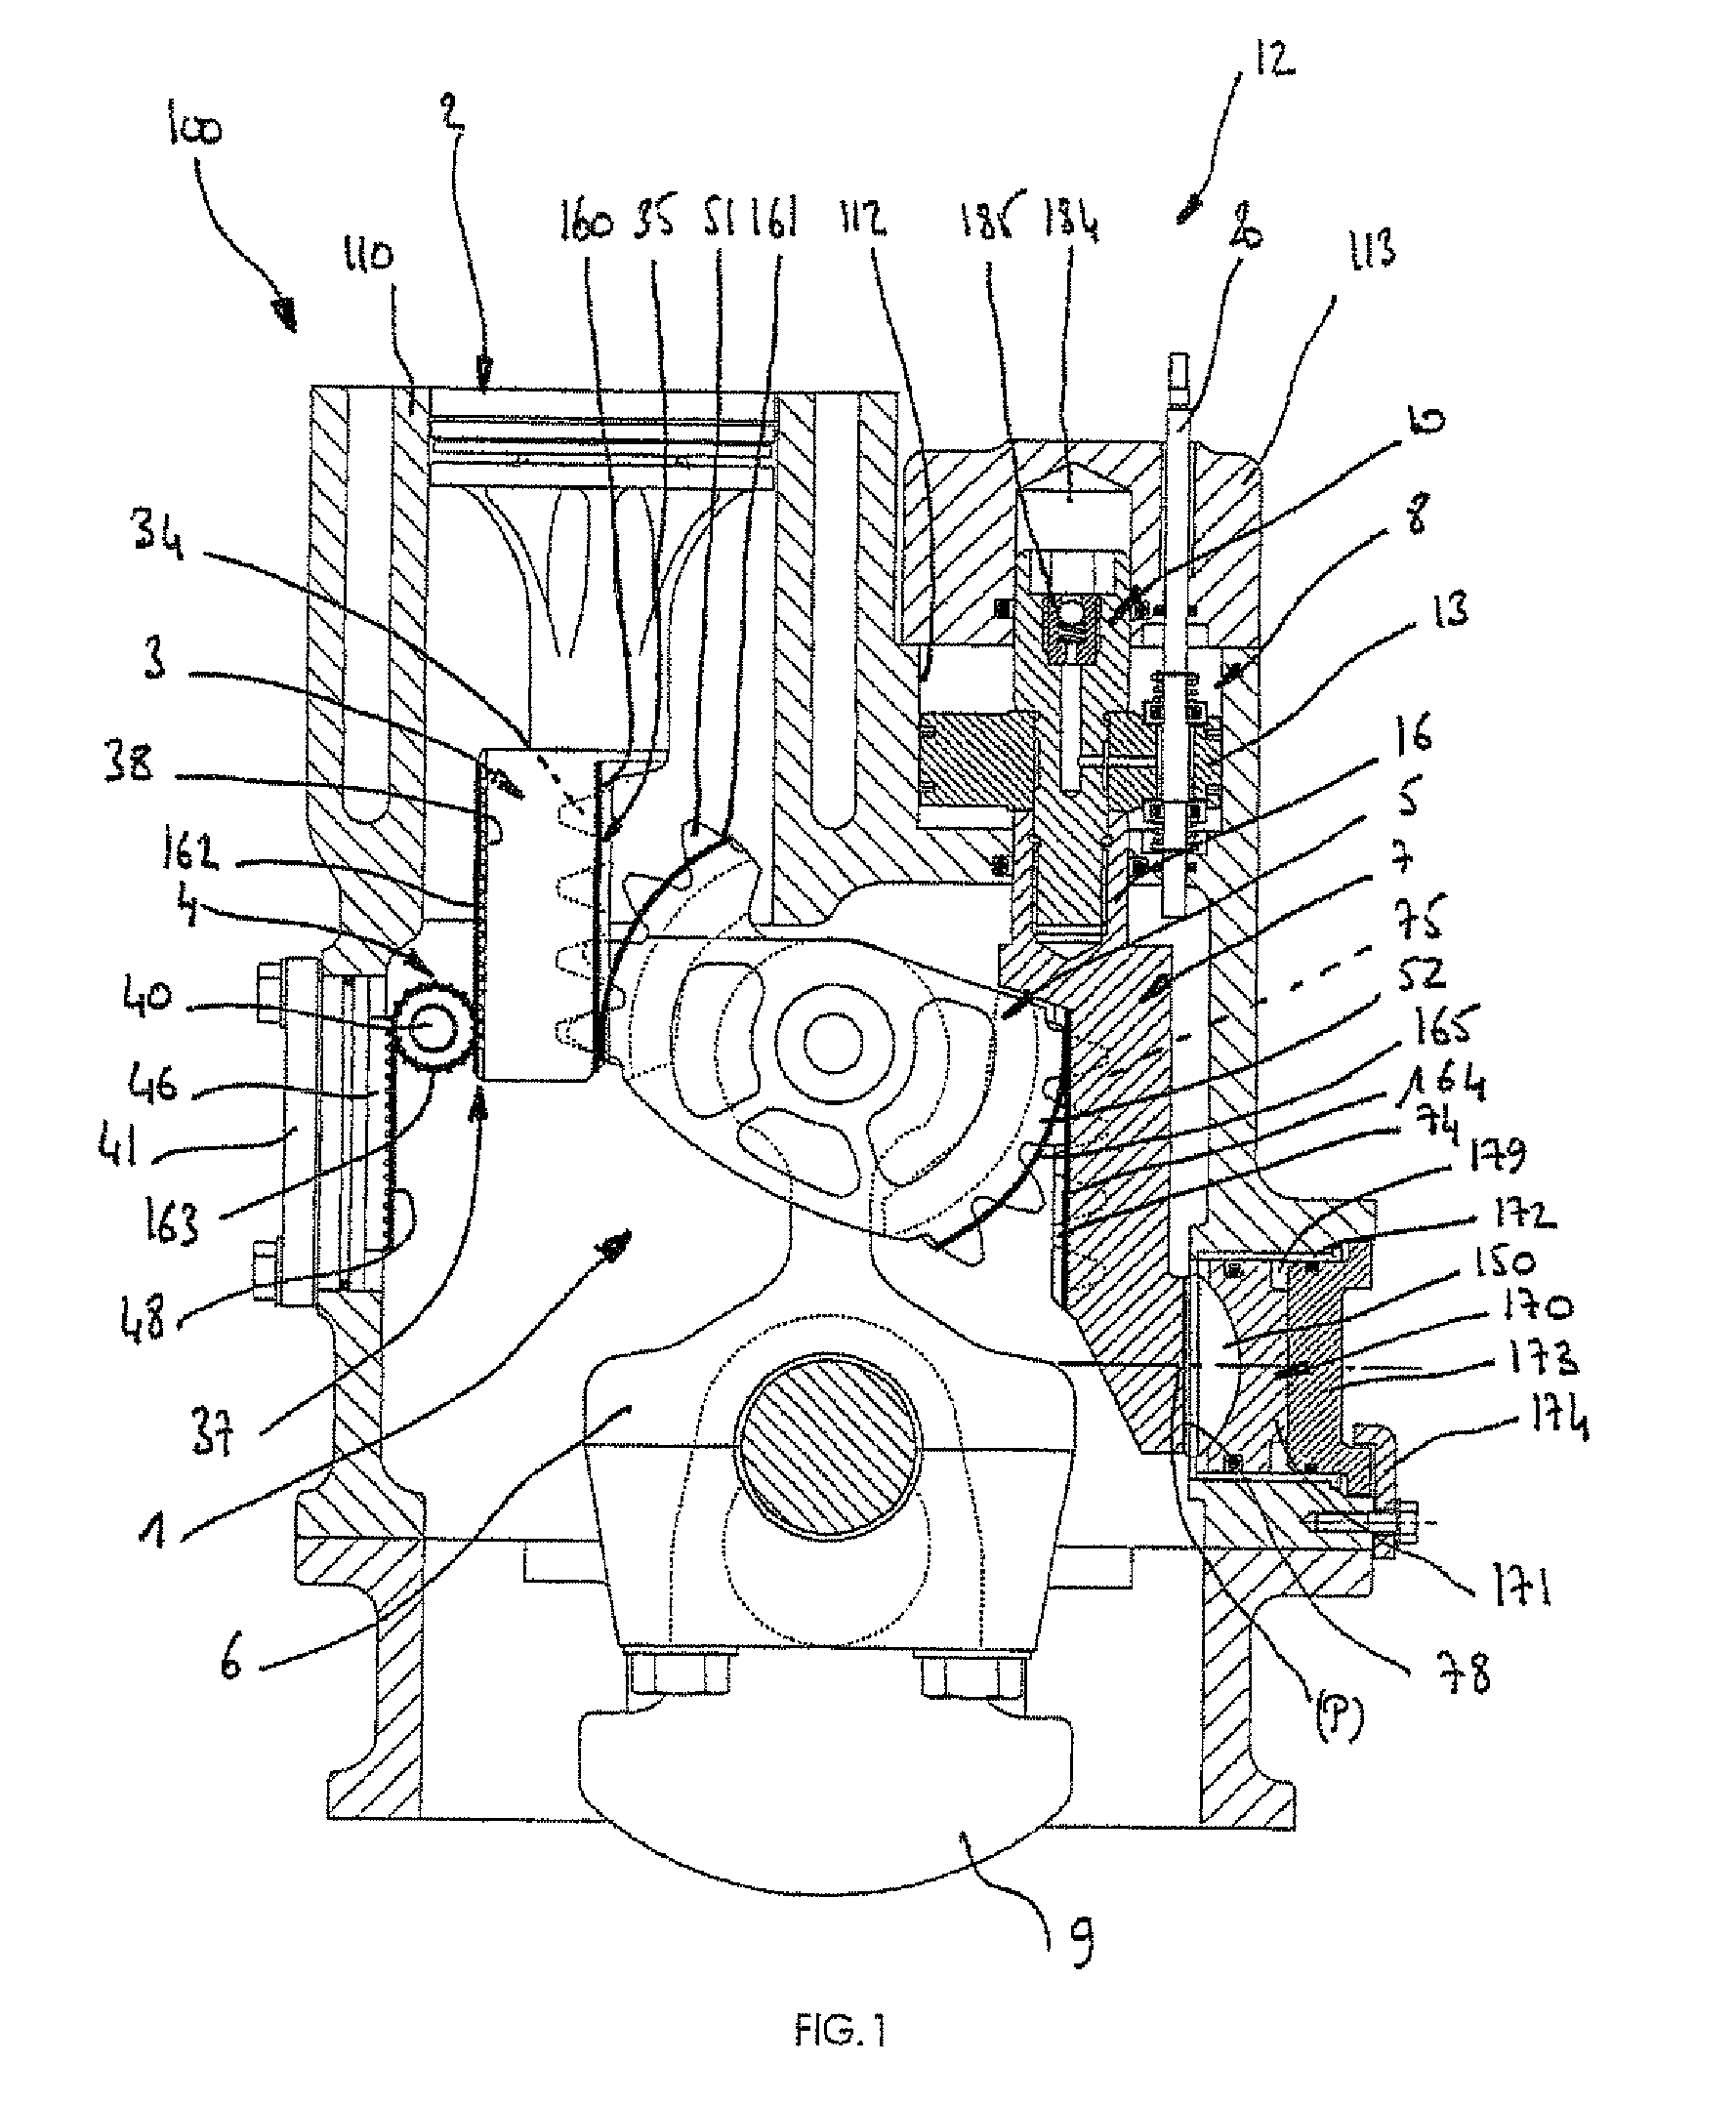 Pressure device for a variable compression ratio engine